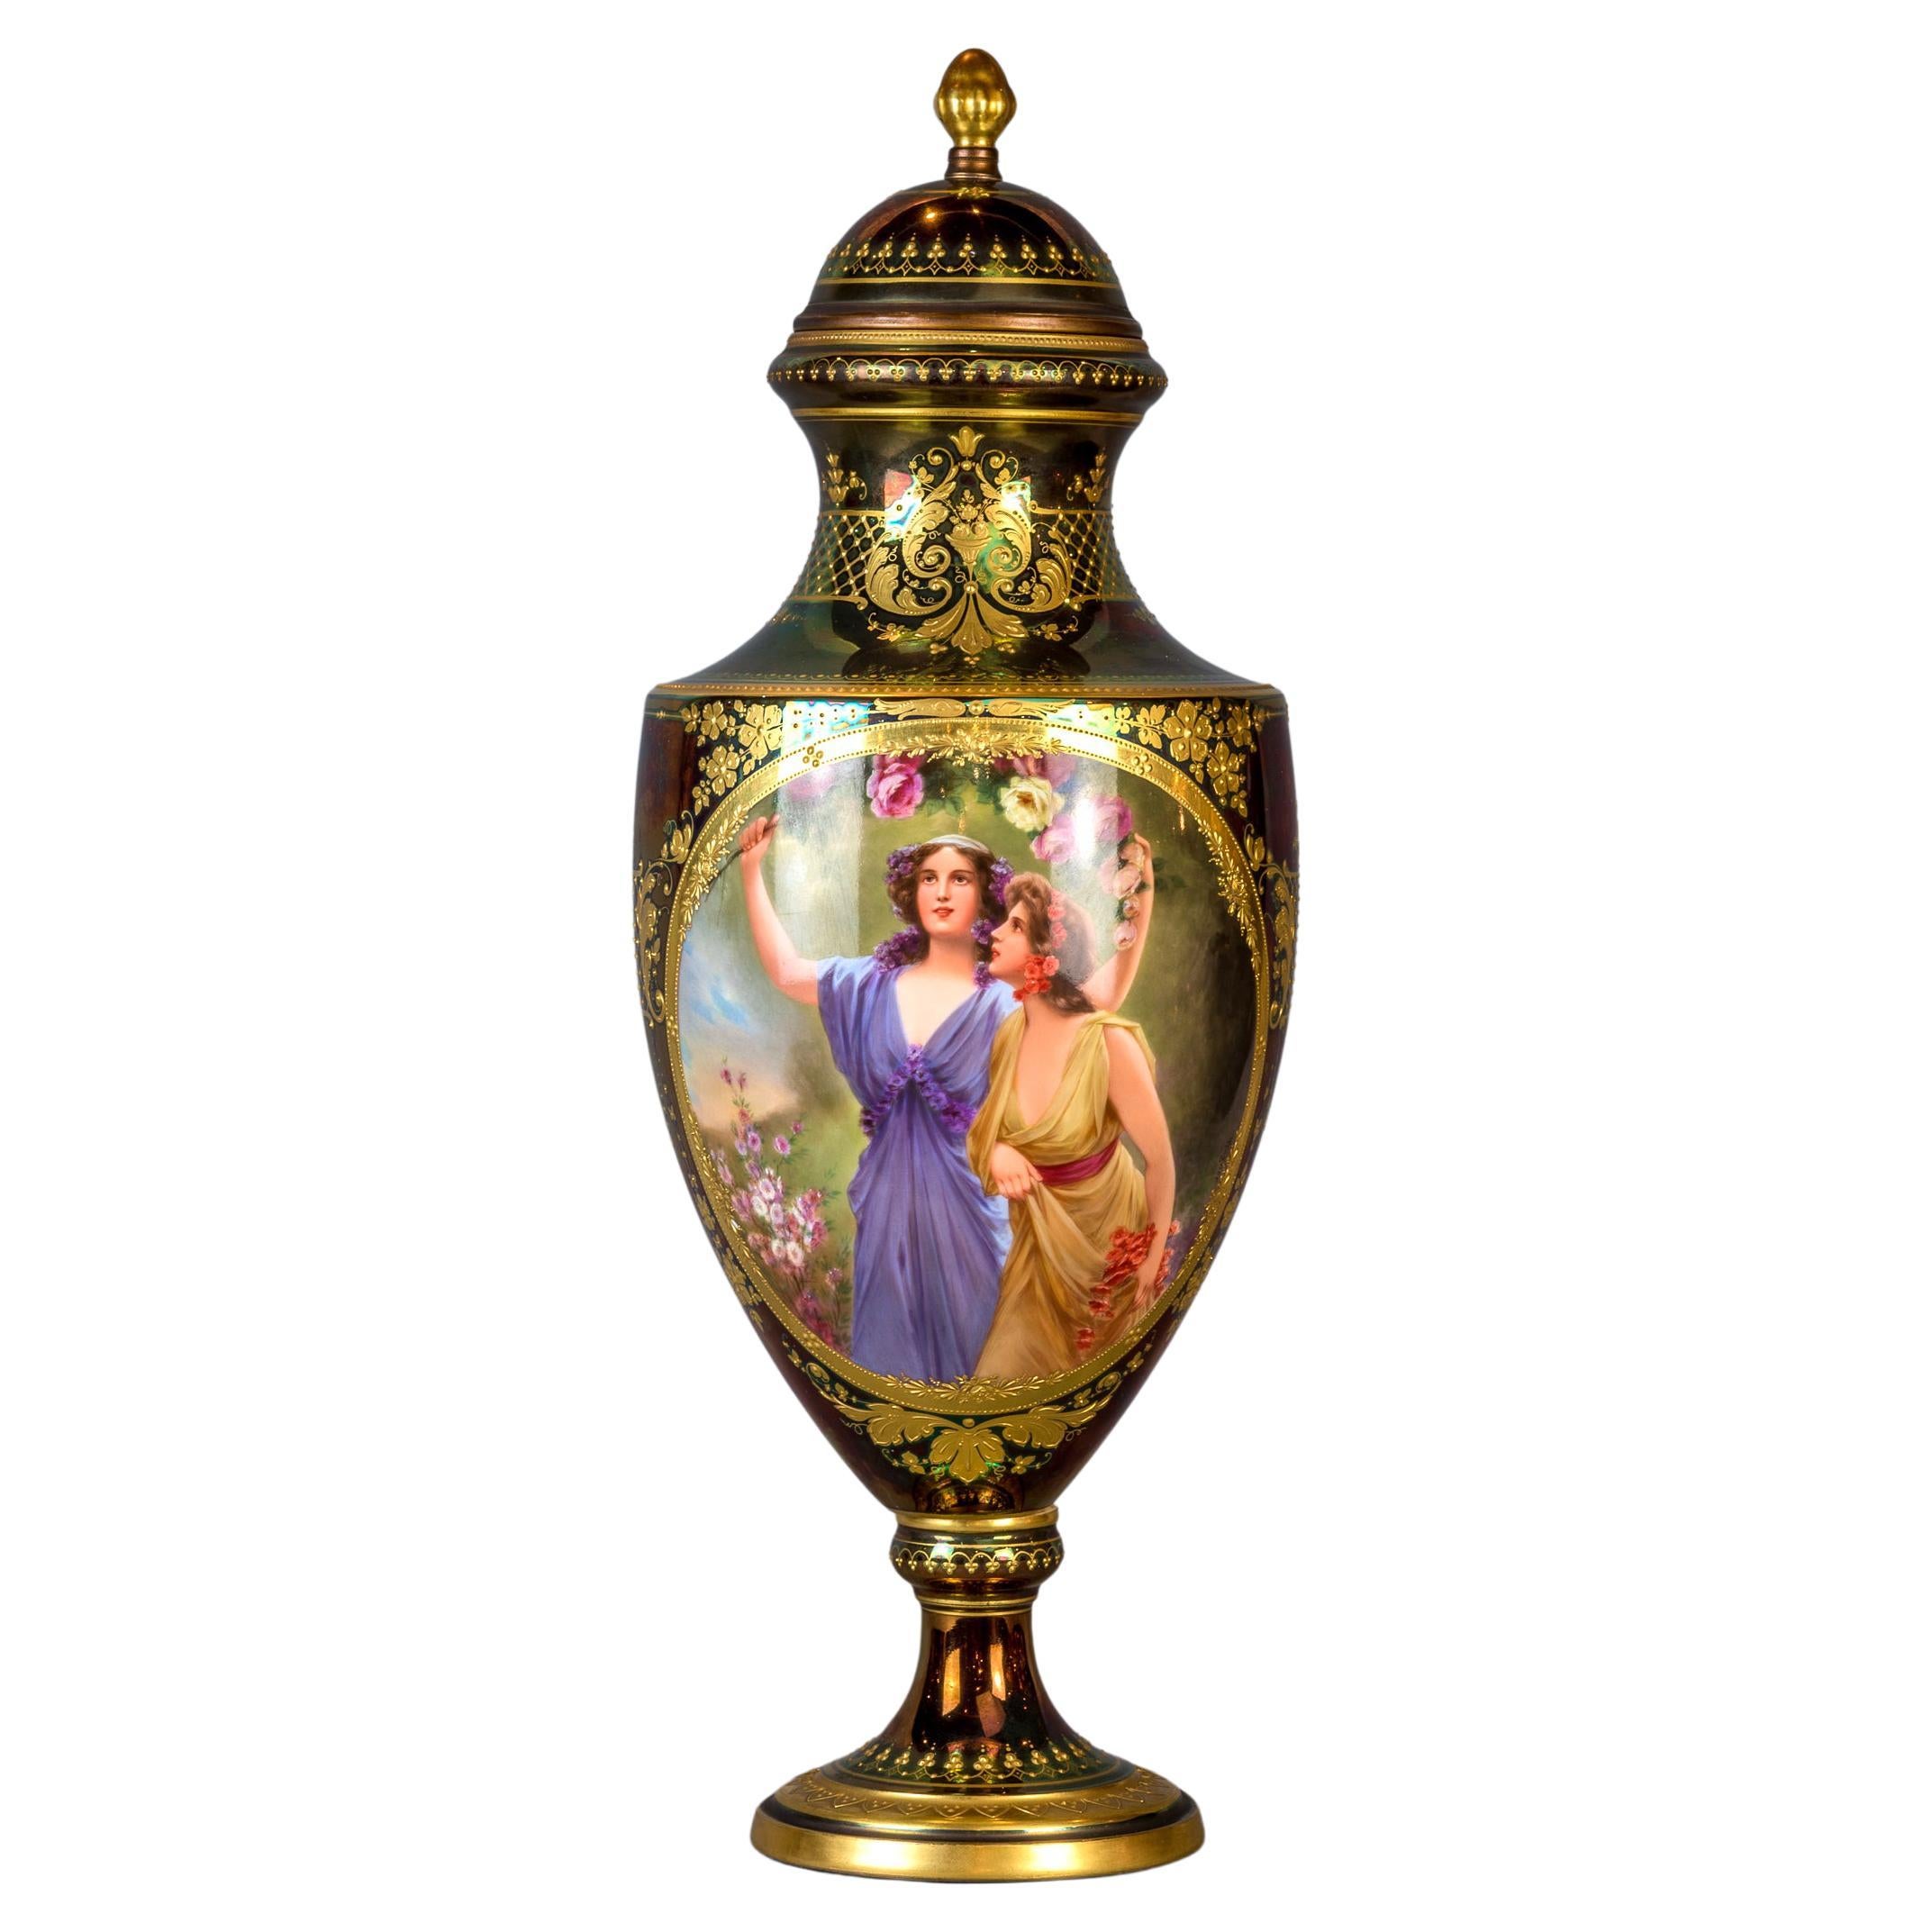 Fine Royal Vienna Gilt-Decorated Jeweled Iridescent Porcelain Urn For Sale